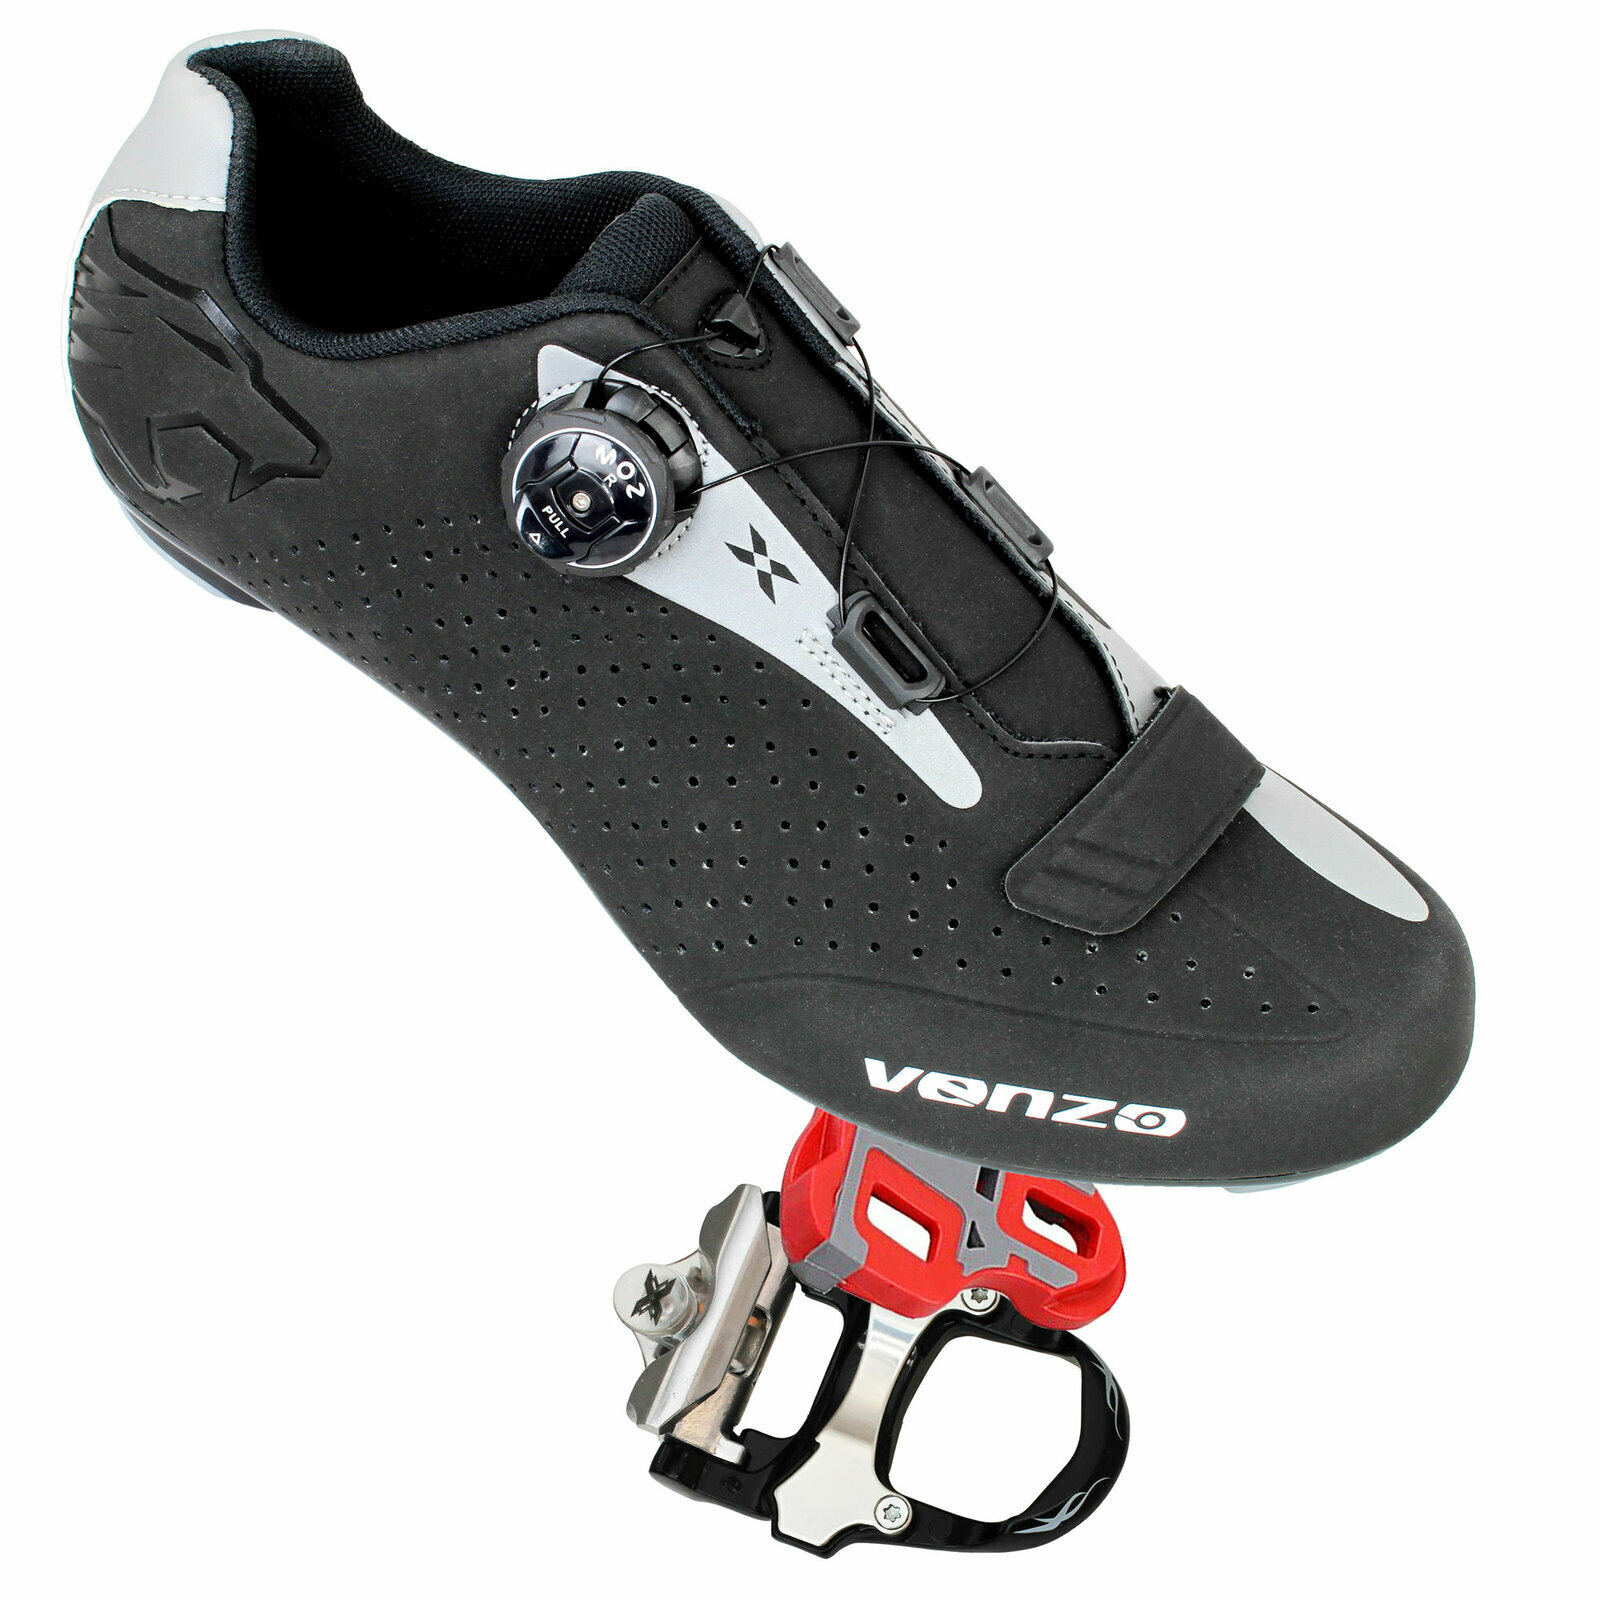 Venzo Cycling Bicycle Road Bike Shoes with Xpedo RF07MC Pedals Size 39